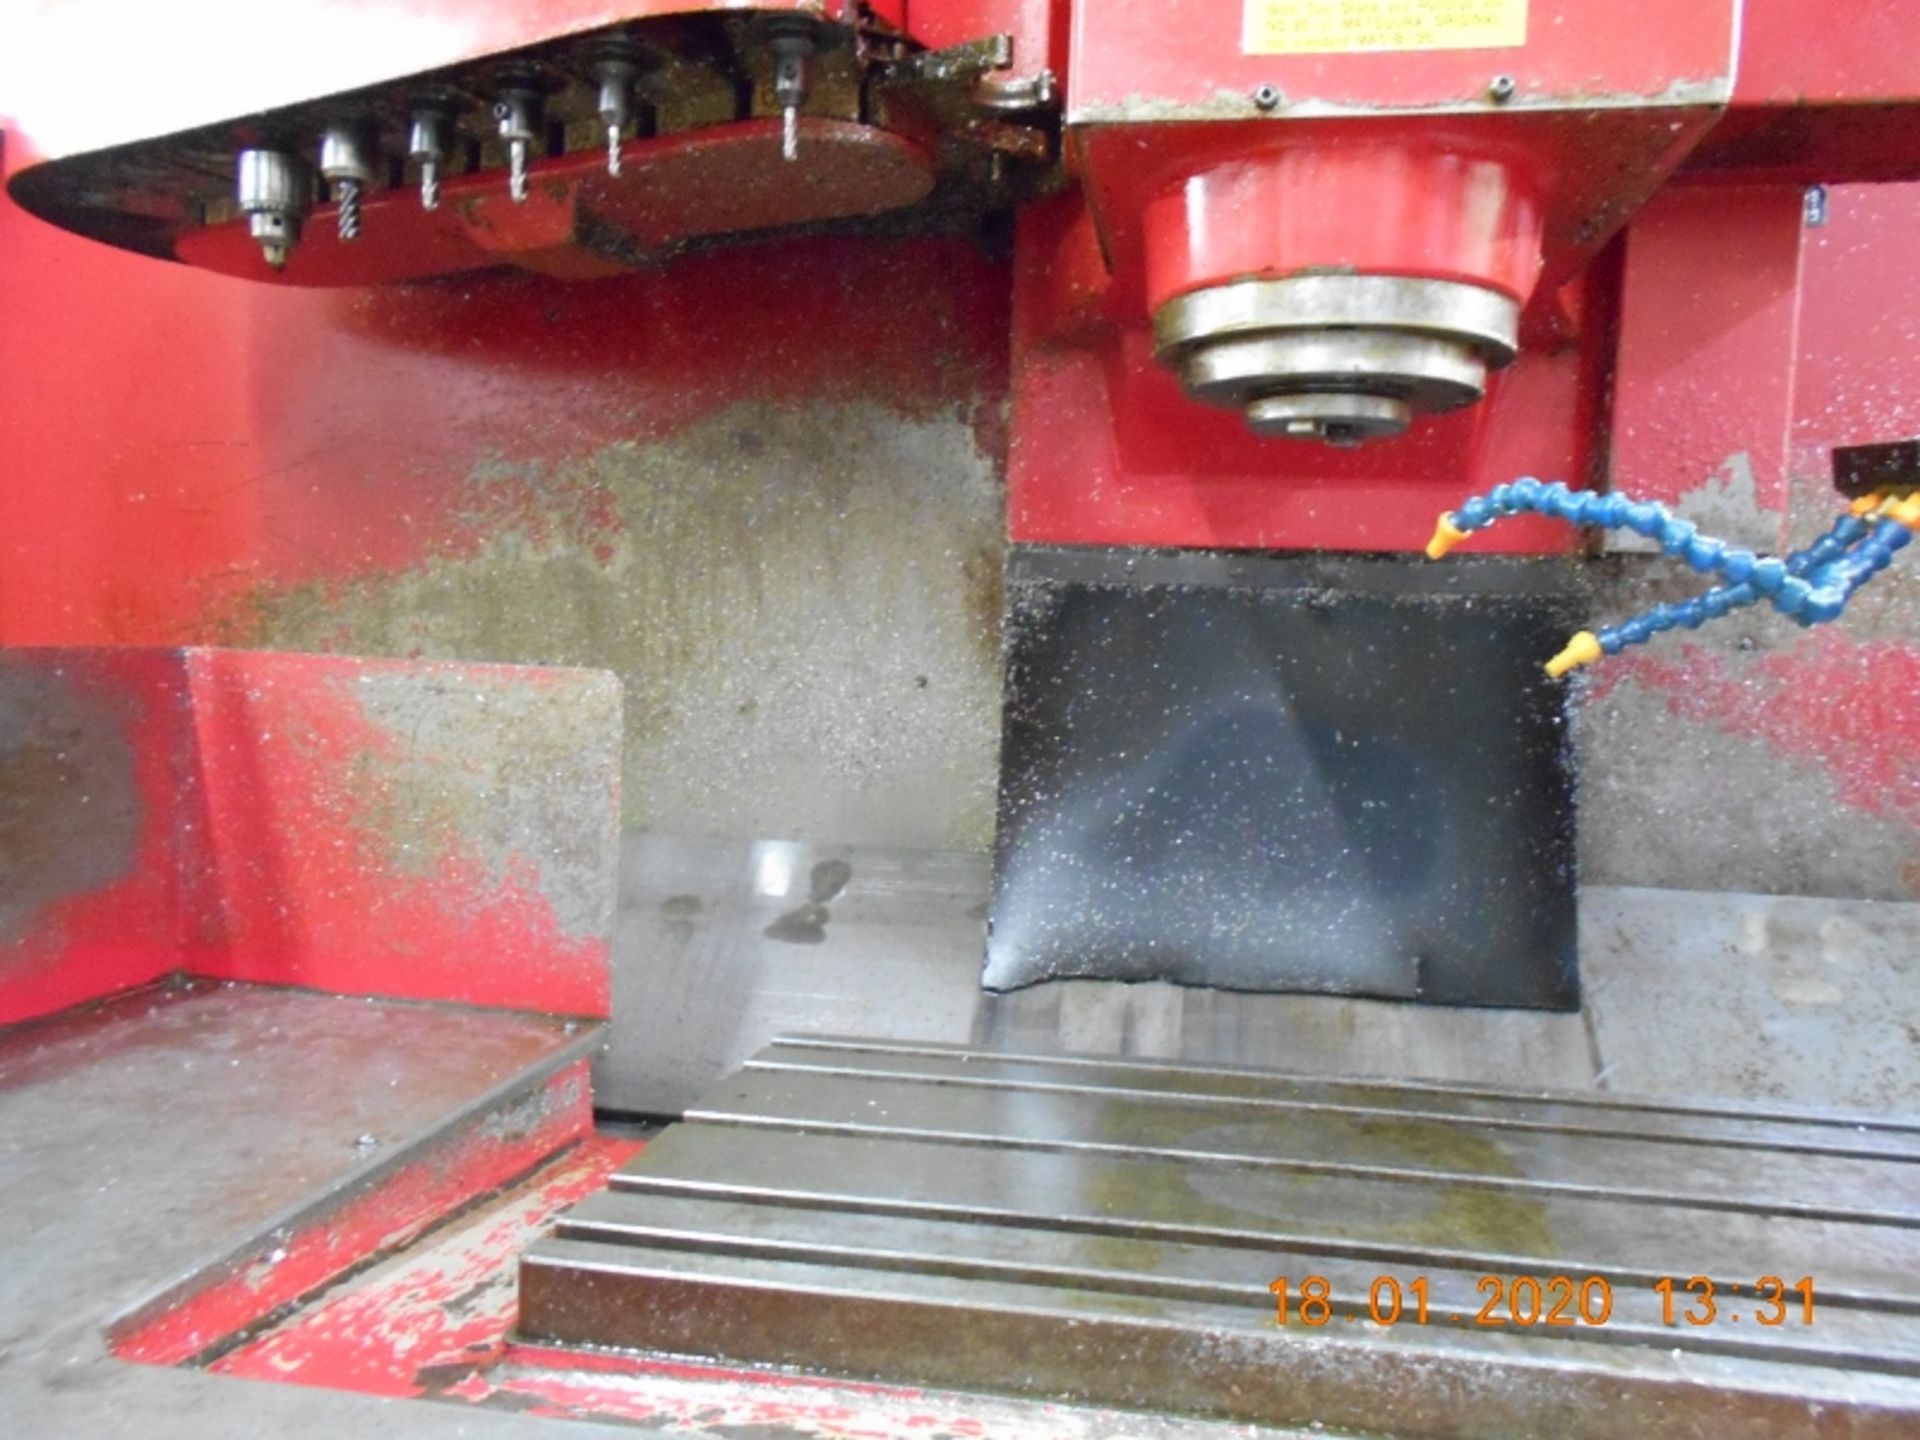 MATSUURA MC-500V 2 CNC MILL, YASNAC MX-2, Crate of Tool Holders - YASNAC Controls - Image 3 of 6